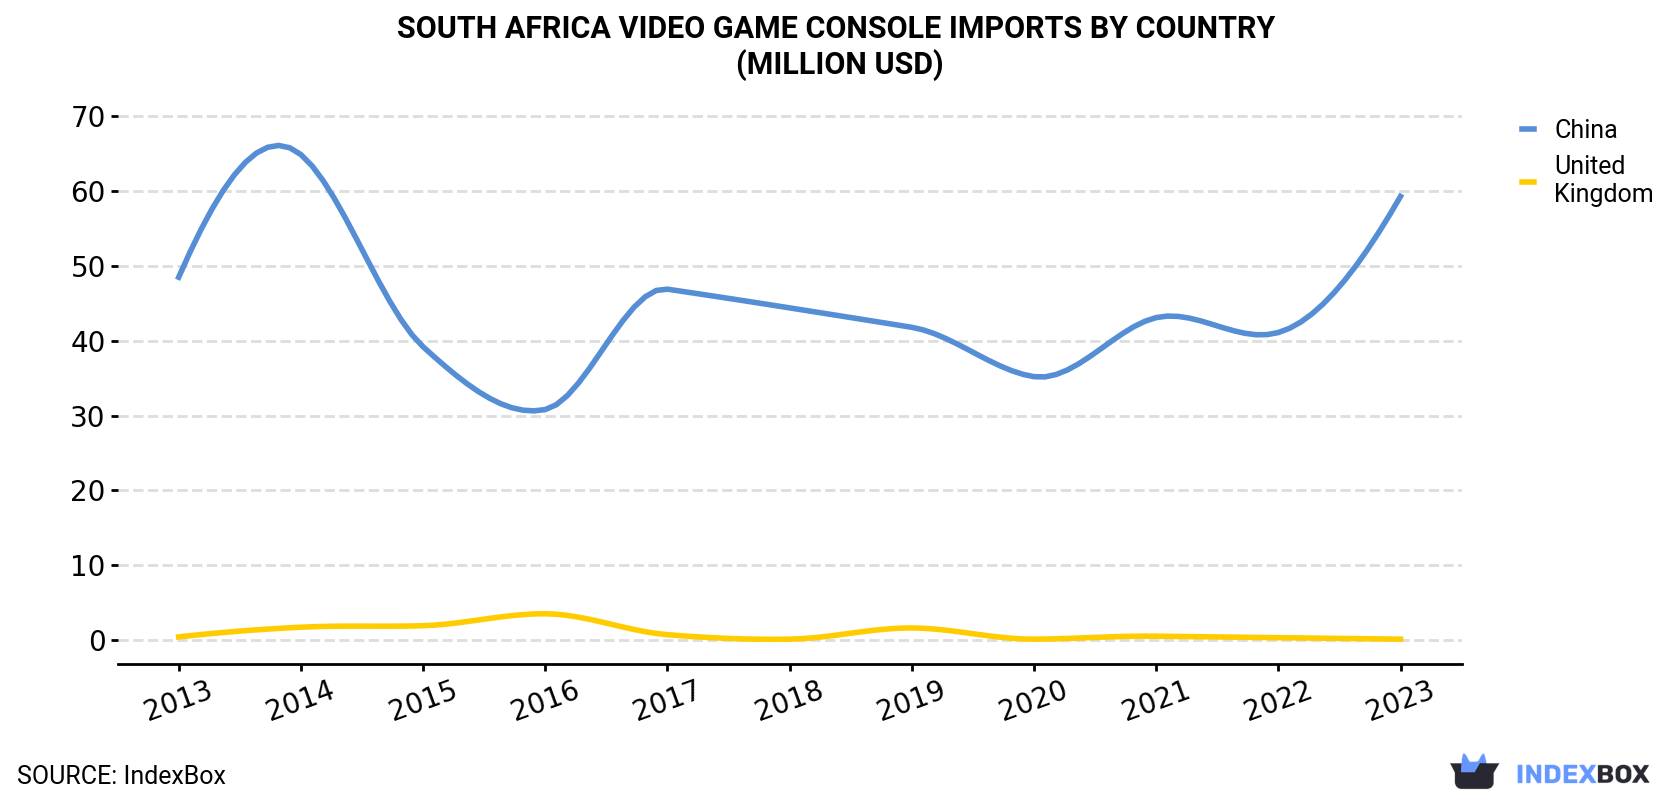 South Africa Video Game Console Imports By Country (Million USD)